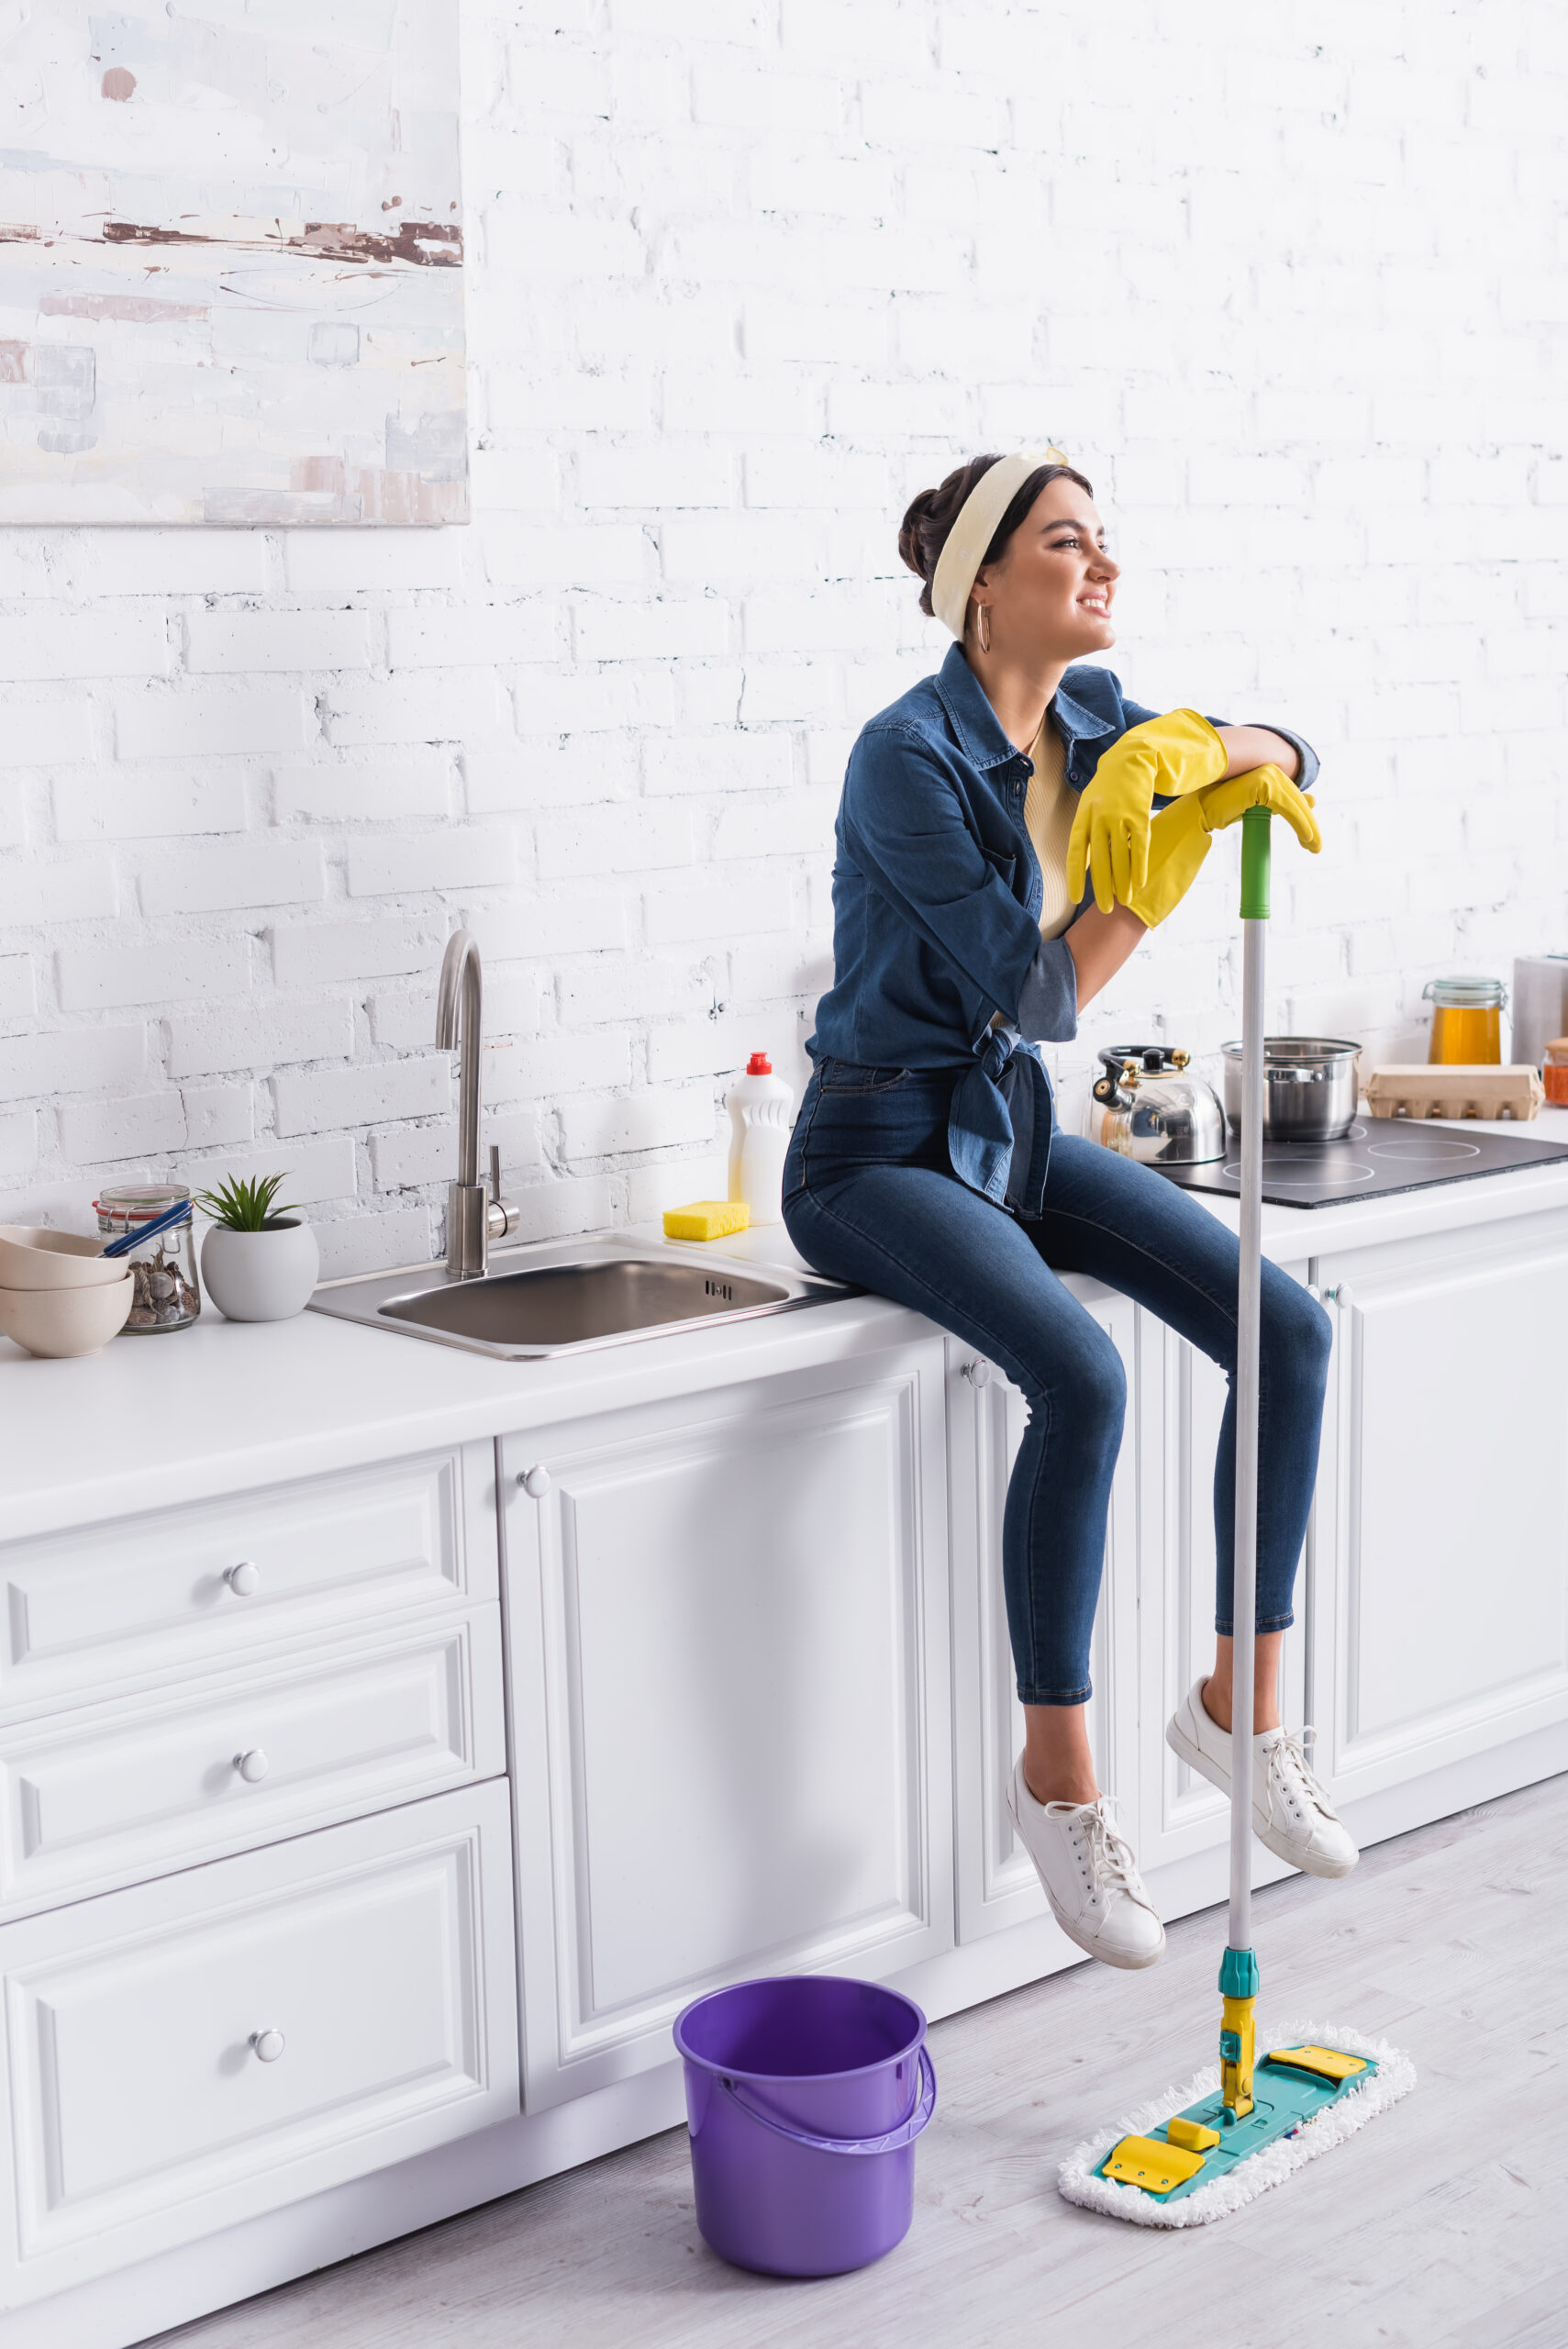 10 Tips on How to Clean Your Home Faster: quick and efficient cleaning ideas and tips. Spring cleaning advice and cleaning checklist